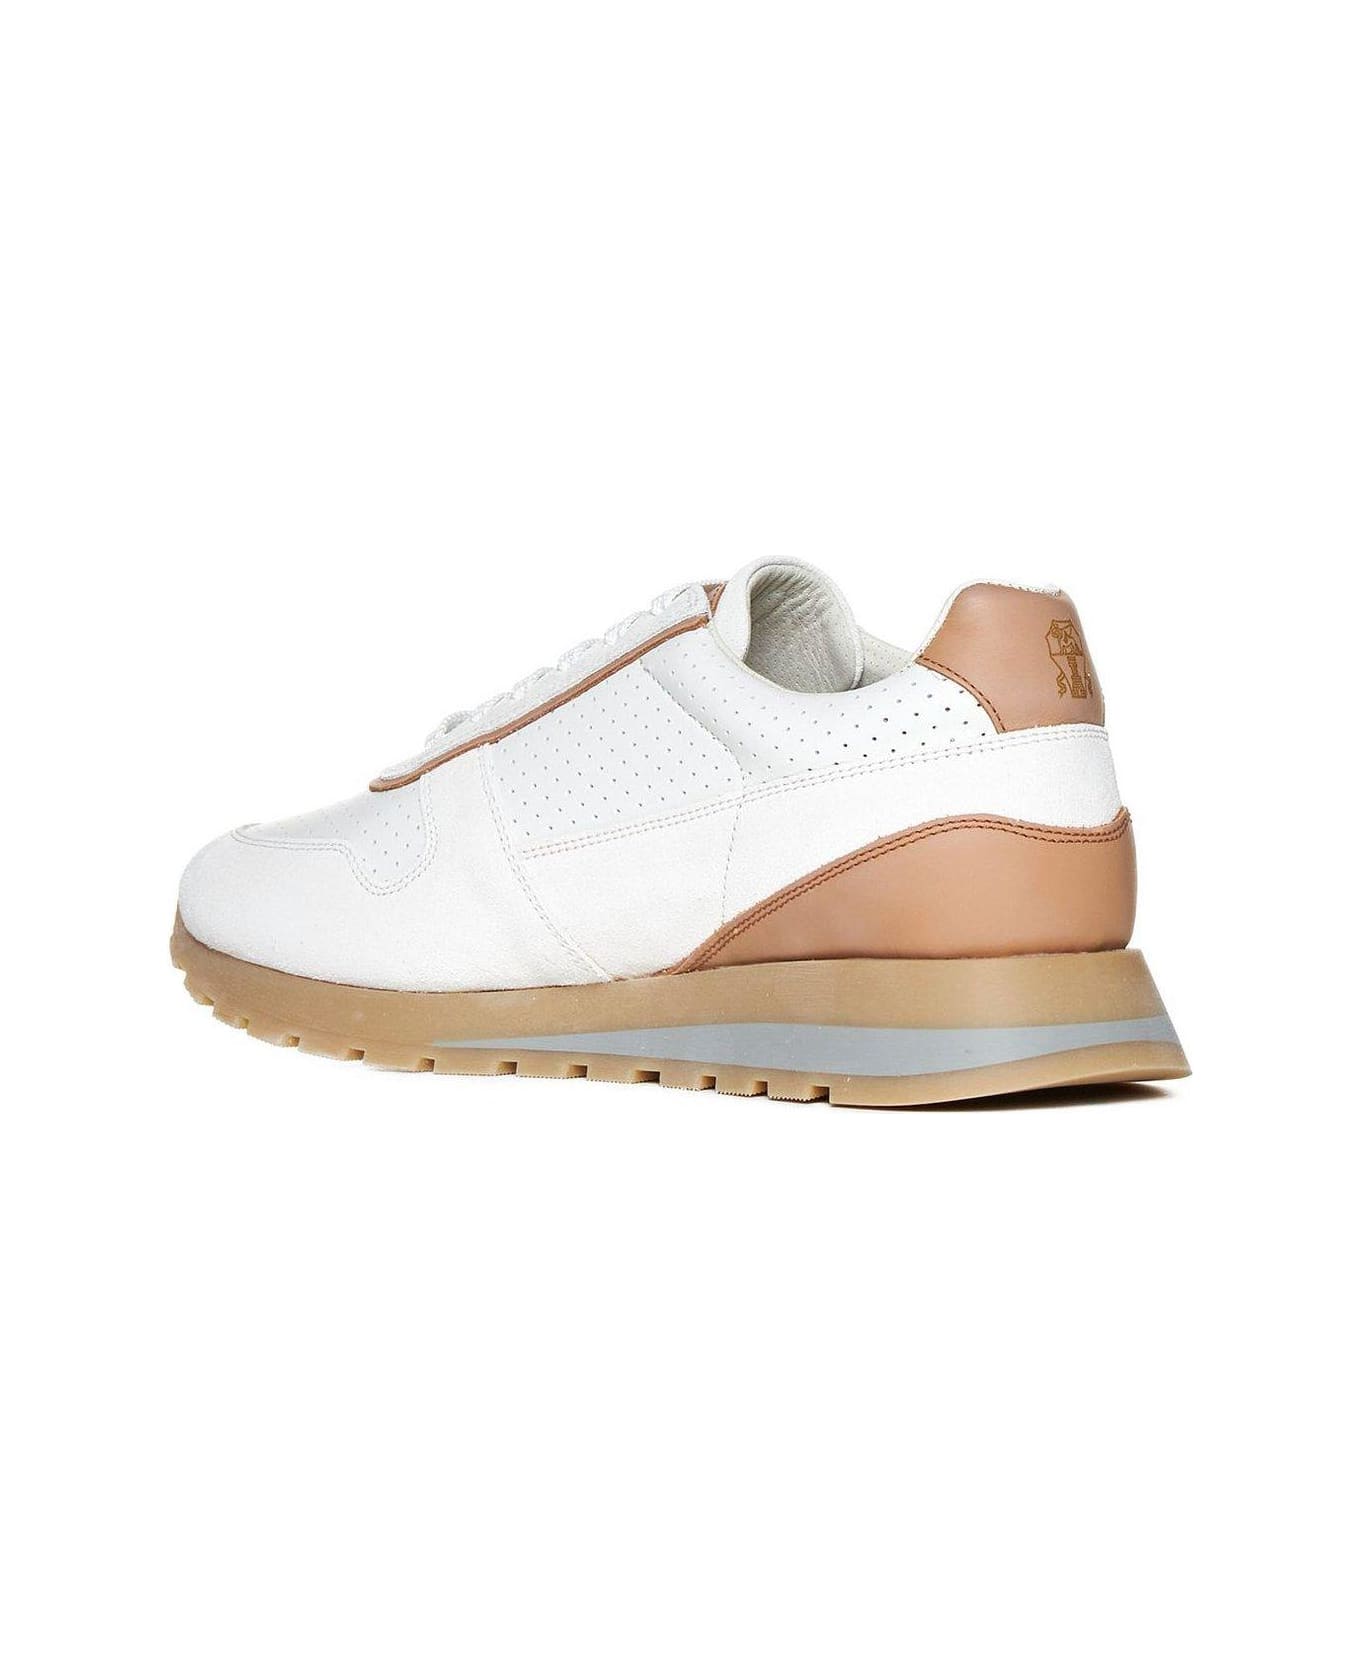 Brunello Cucinelli Panelled Lace-up Sneakers - BLANCO_BIANCO_CAMEL